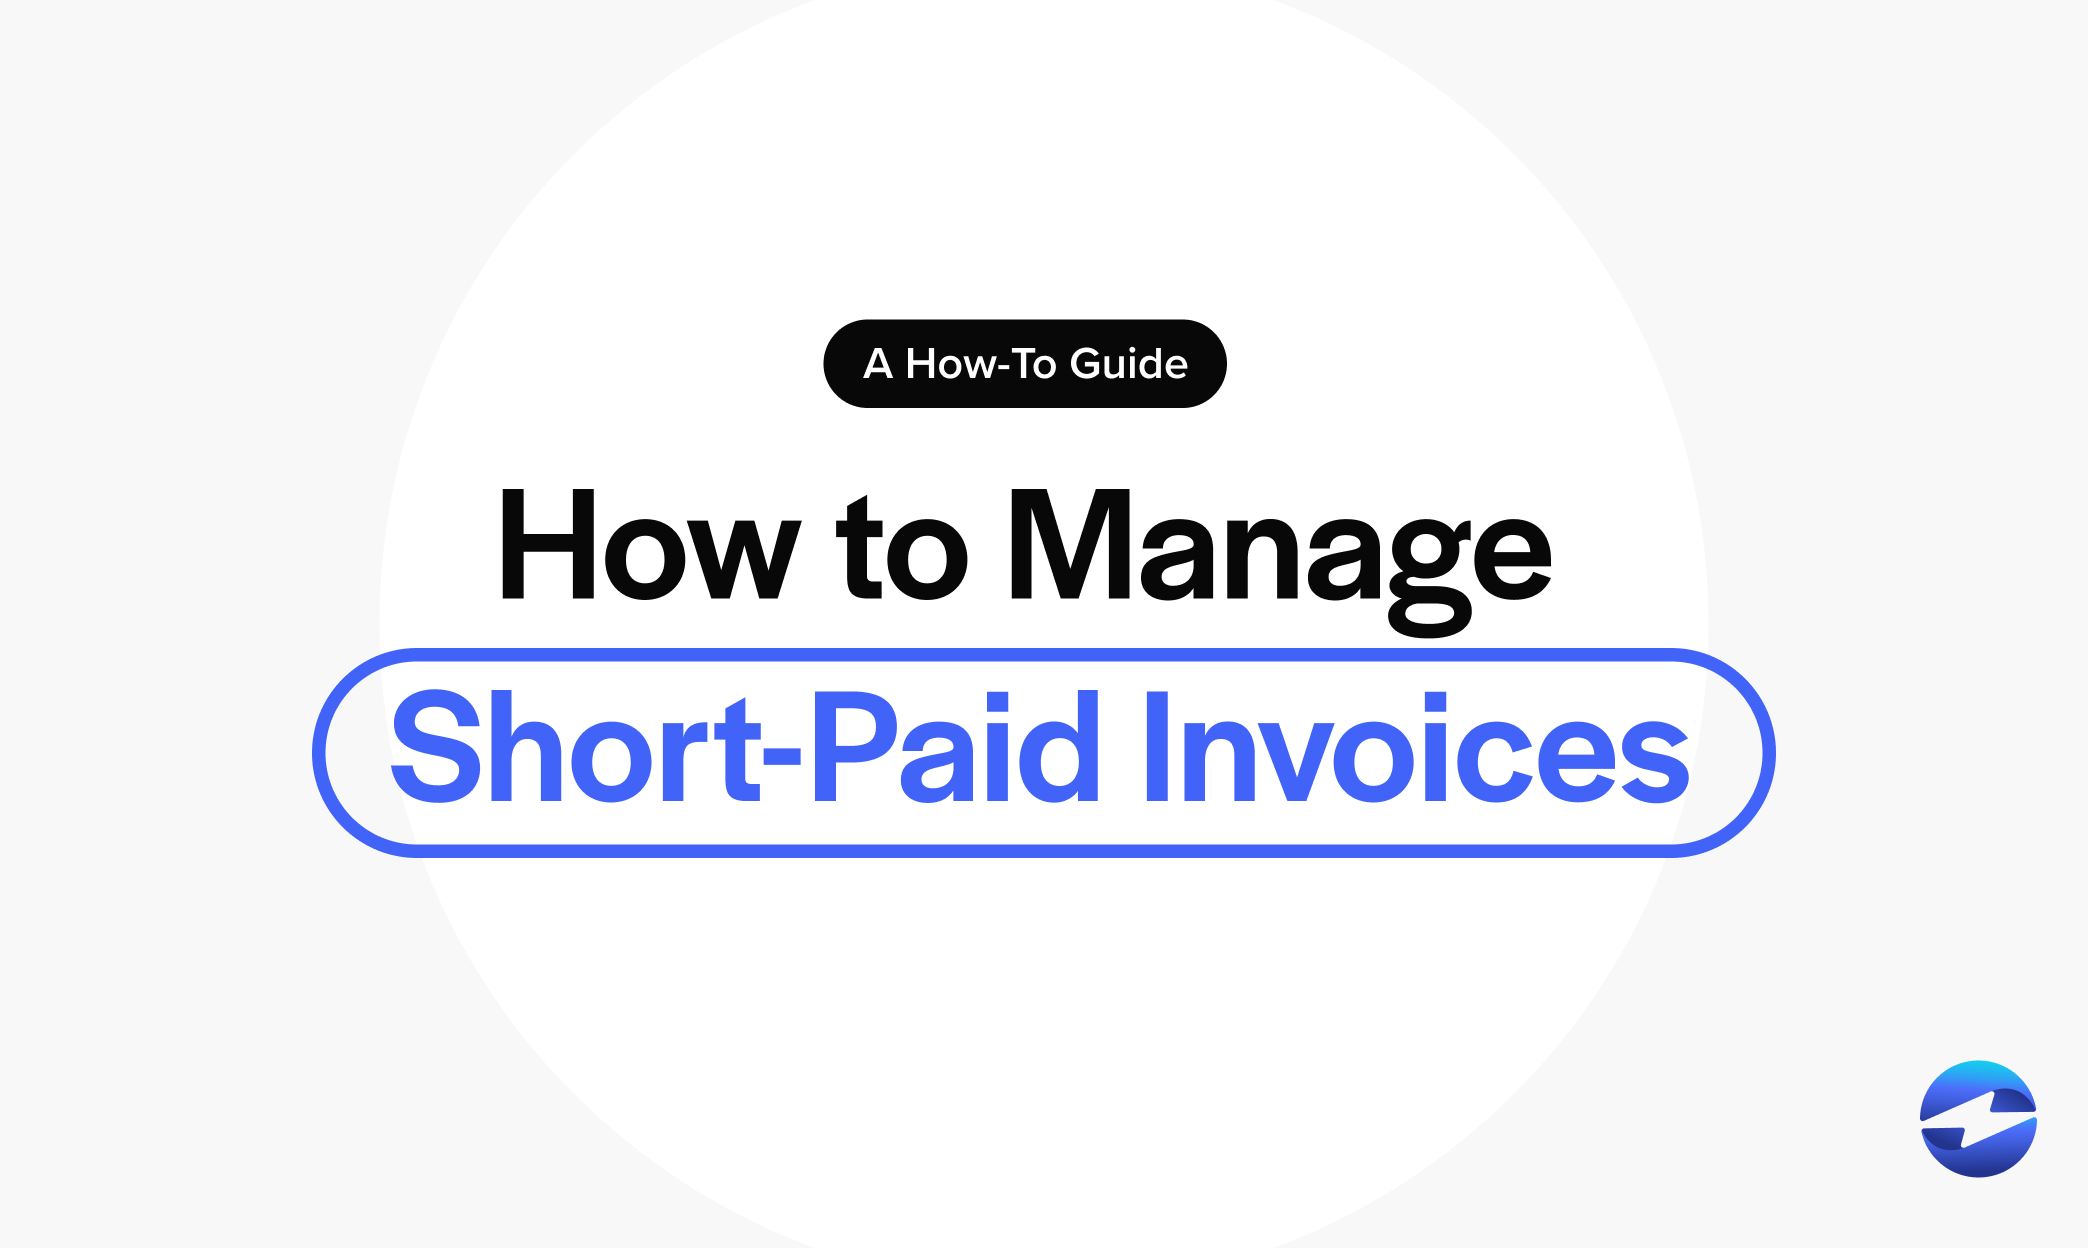 How To Manage Short-Paid Invoices